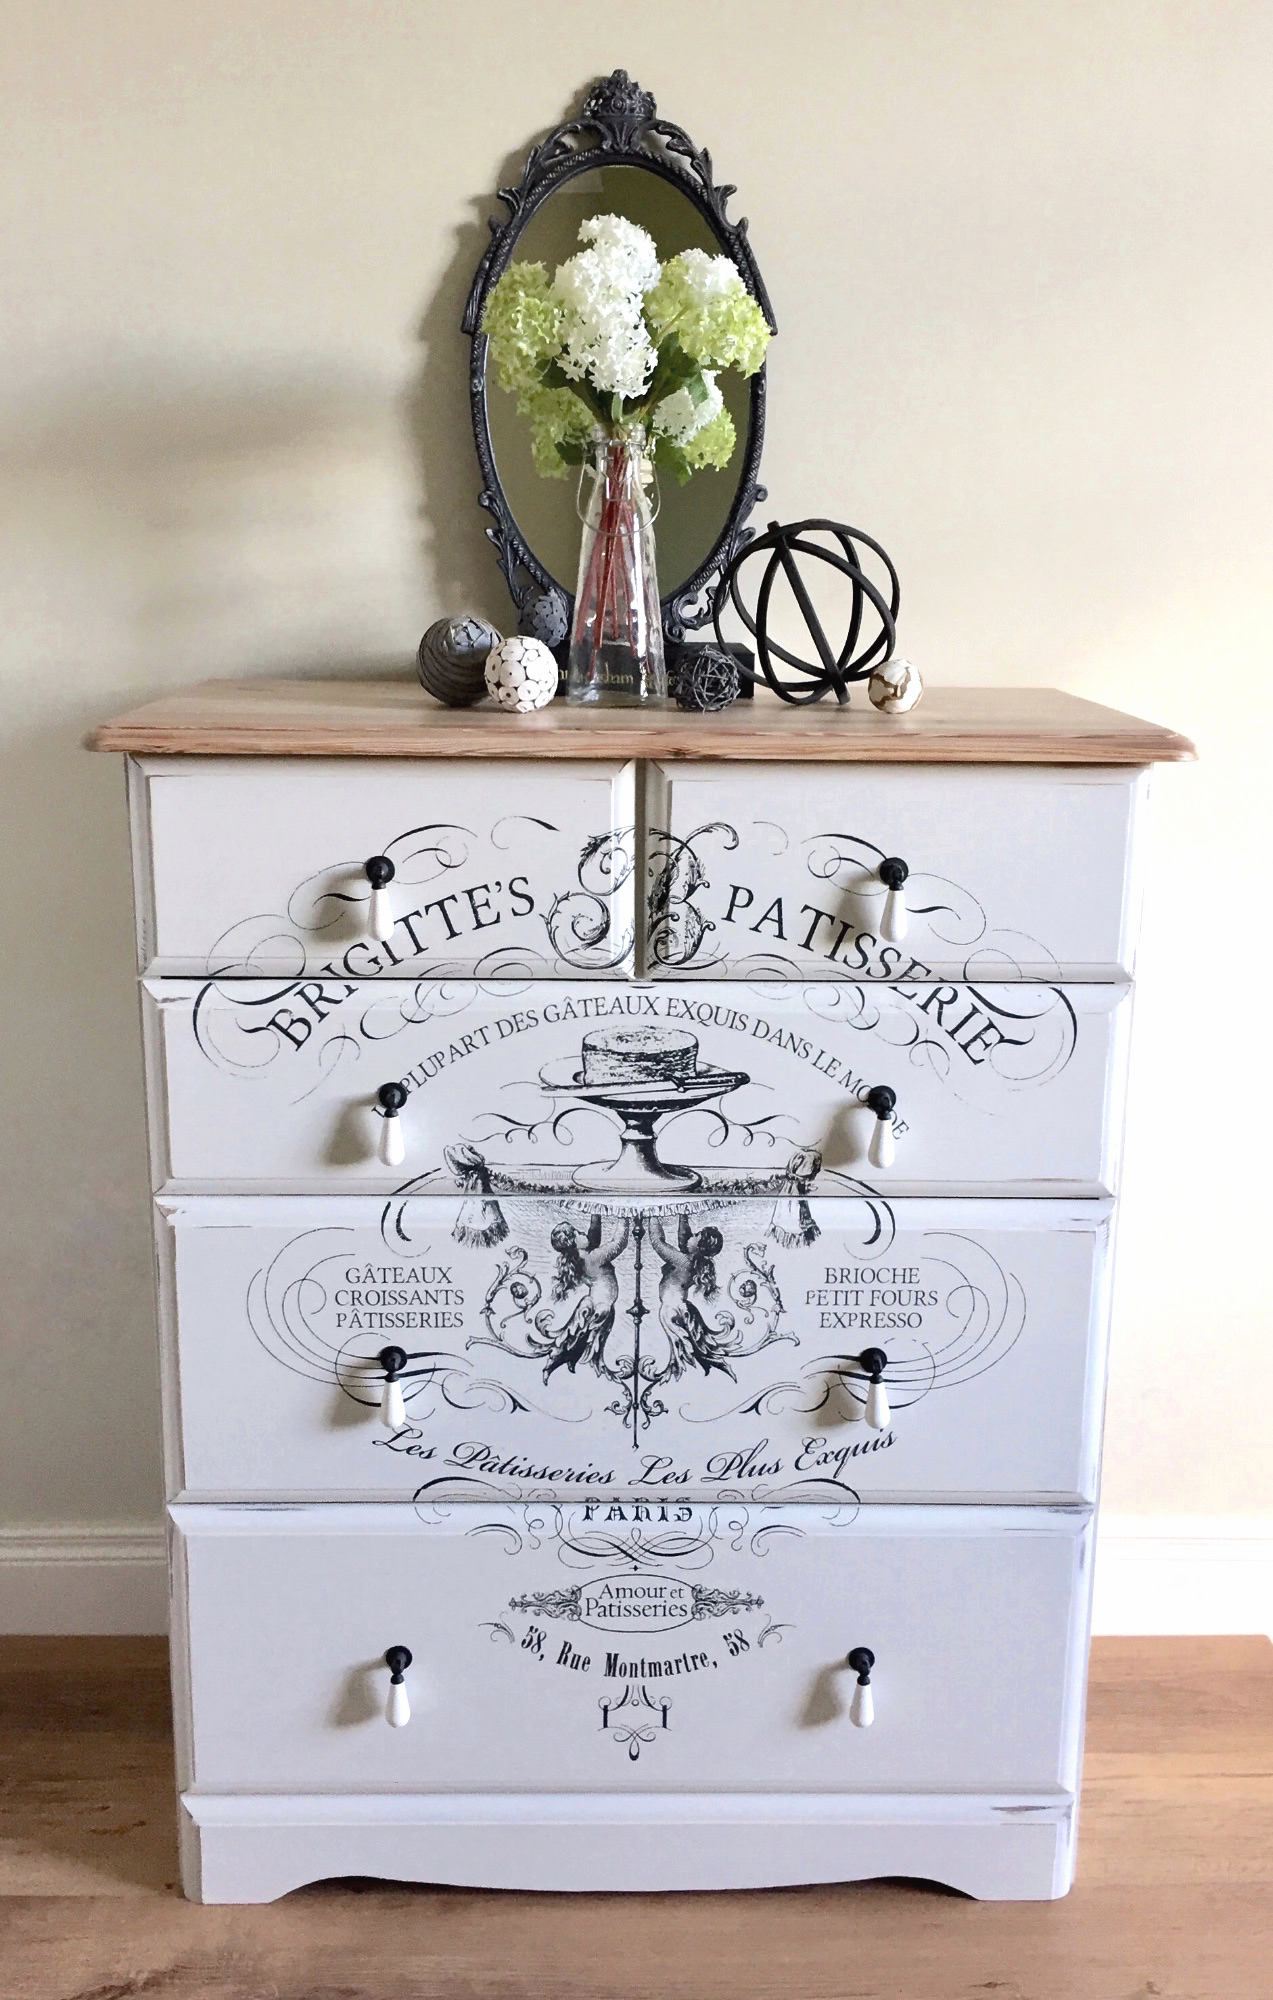 Upcycled furniture